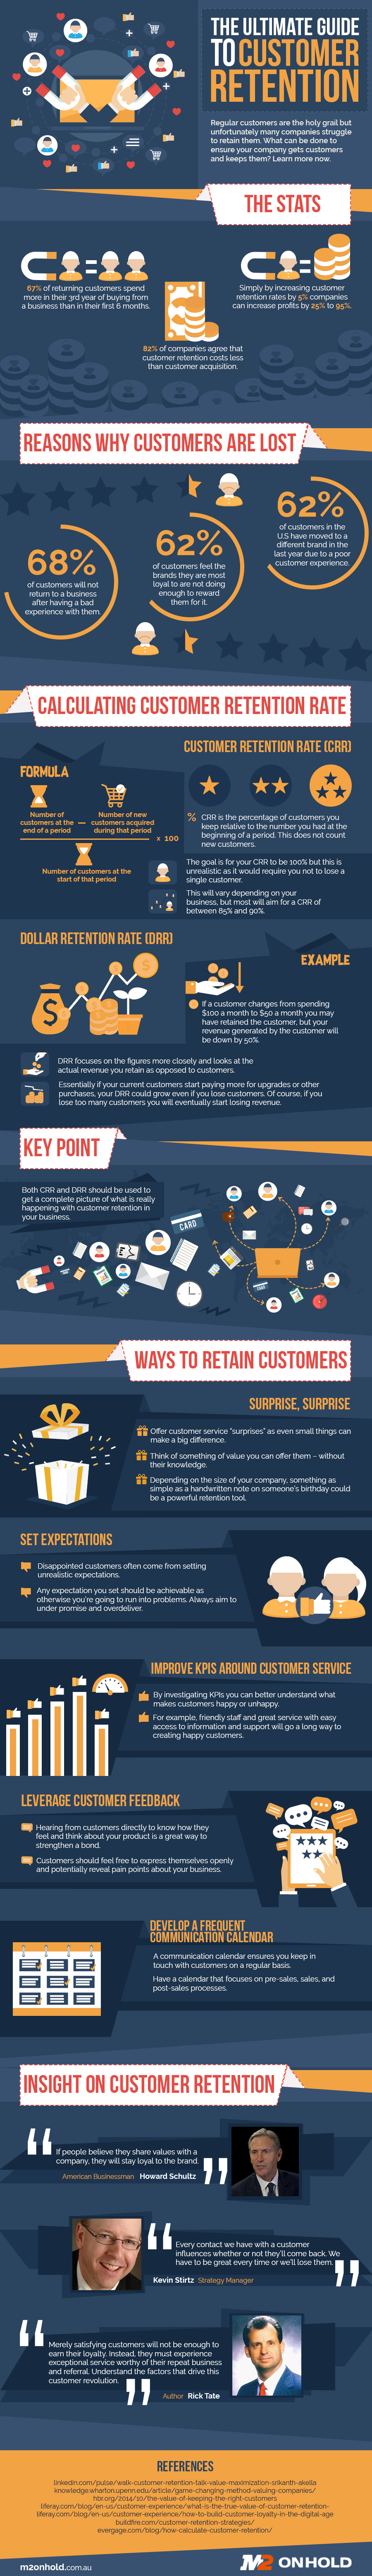 Ultimate guide to customer retention infographic